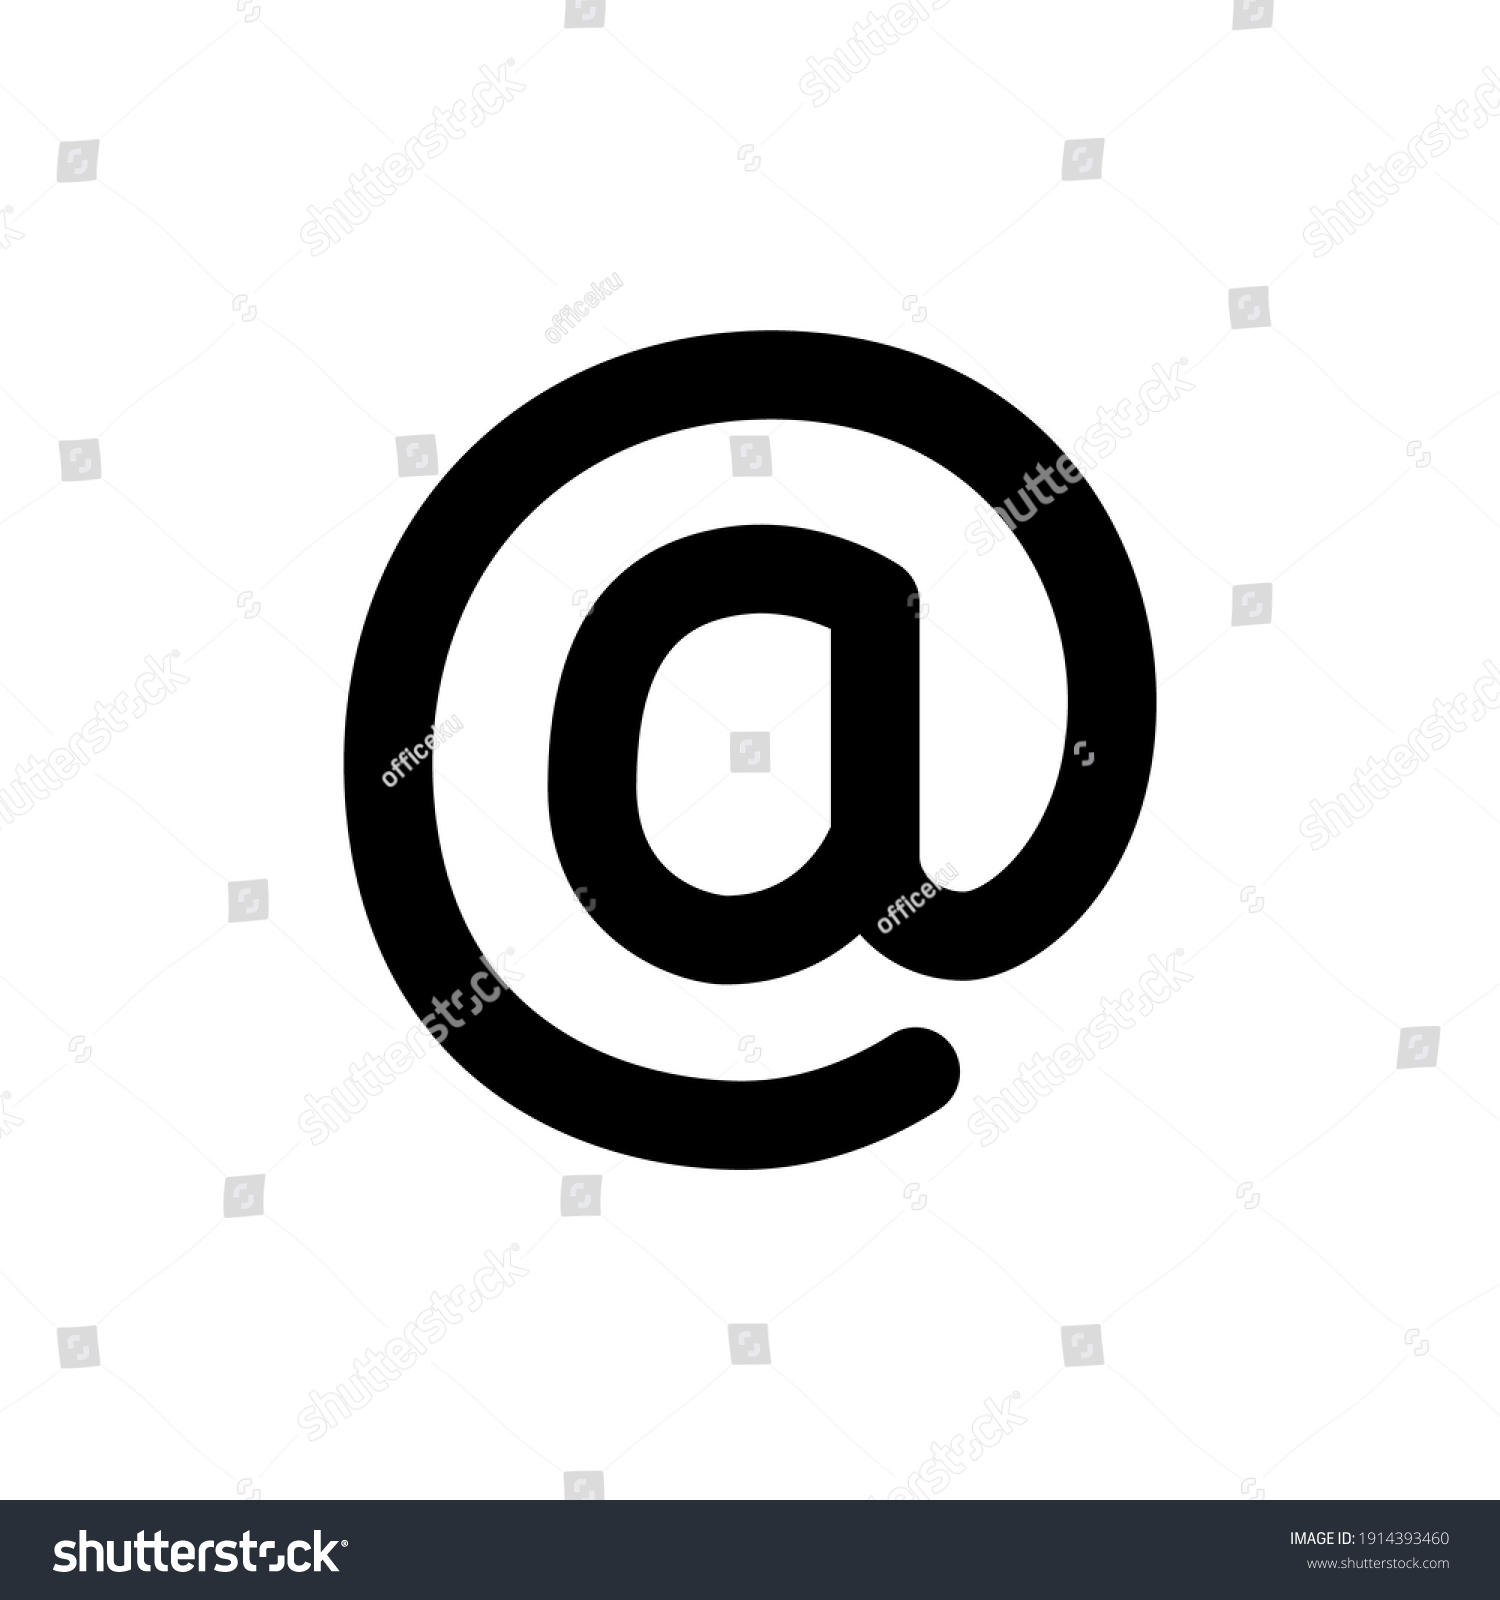 at sign icon. Email adress sign icon in solid black flat shape glyph icon, isolated on white background  #1914393460